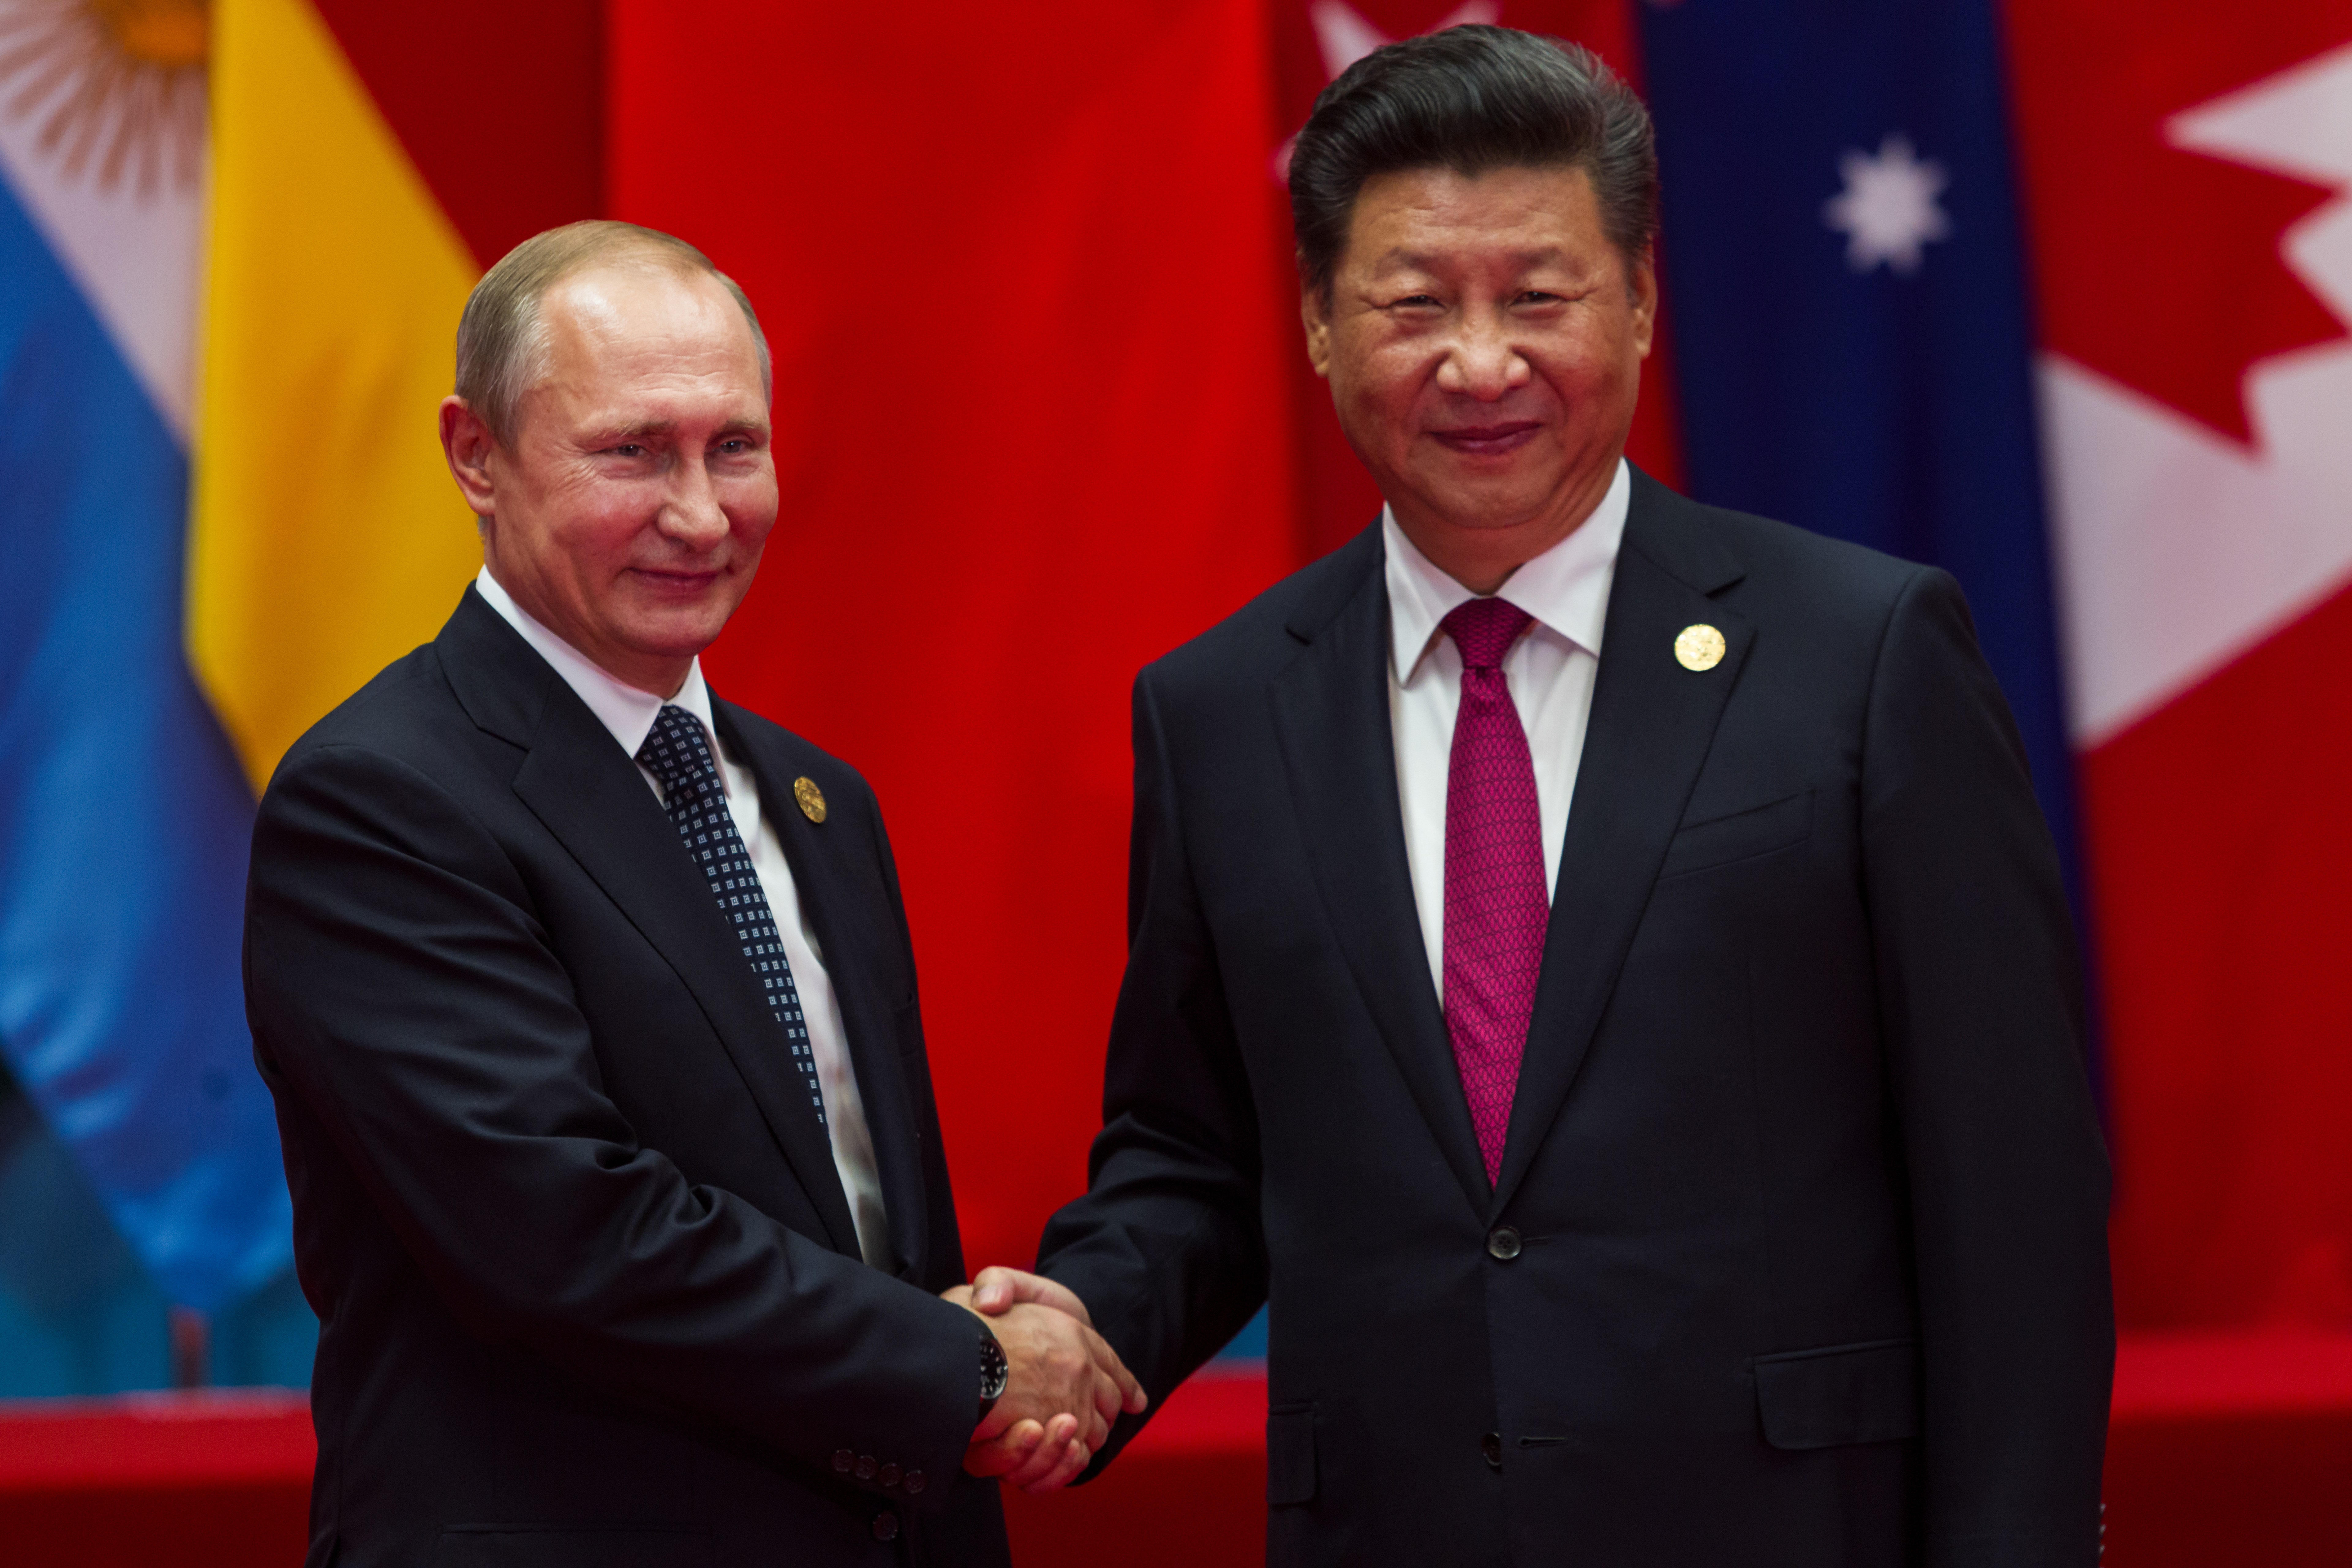 As Vladimir Putin Meets Xi Jinping, Russia May Consider Issuing Yuan-Denominated Government Bonds